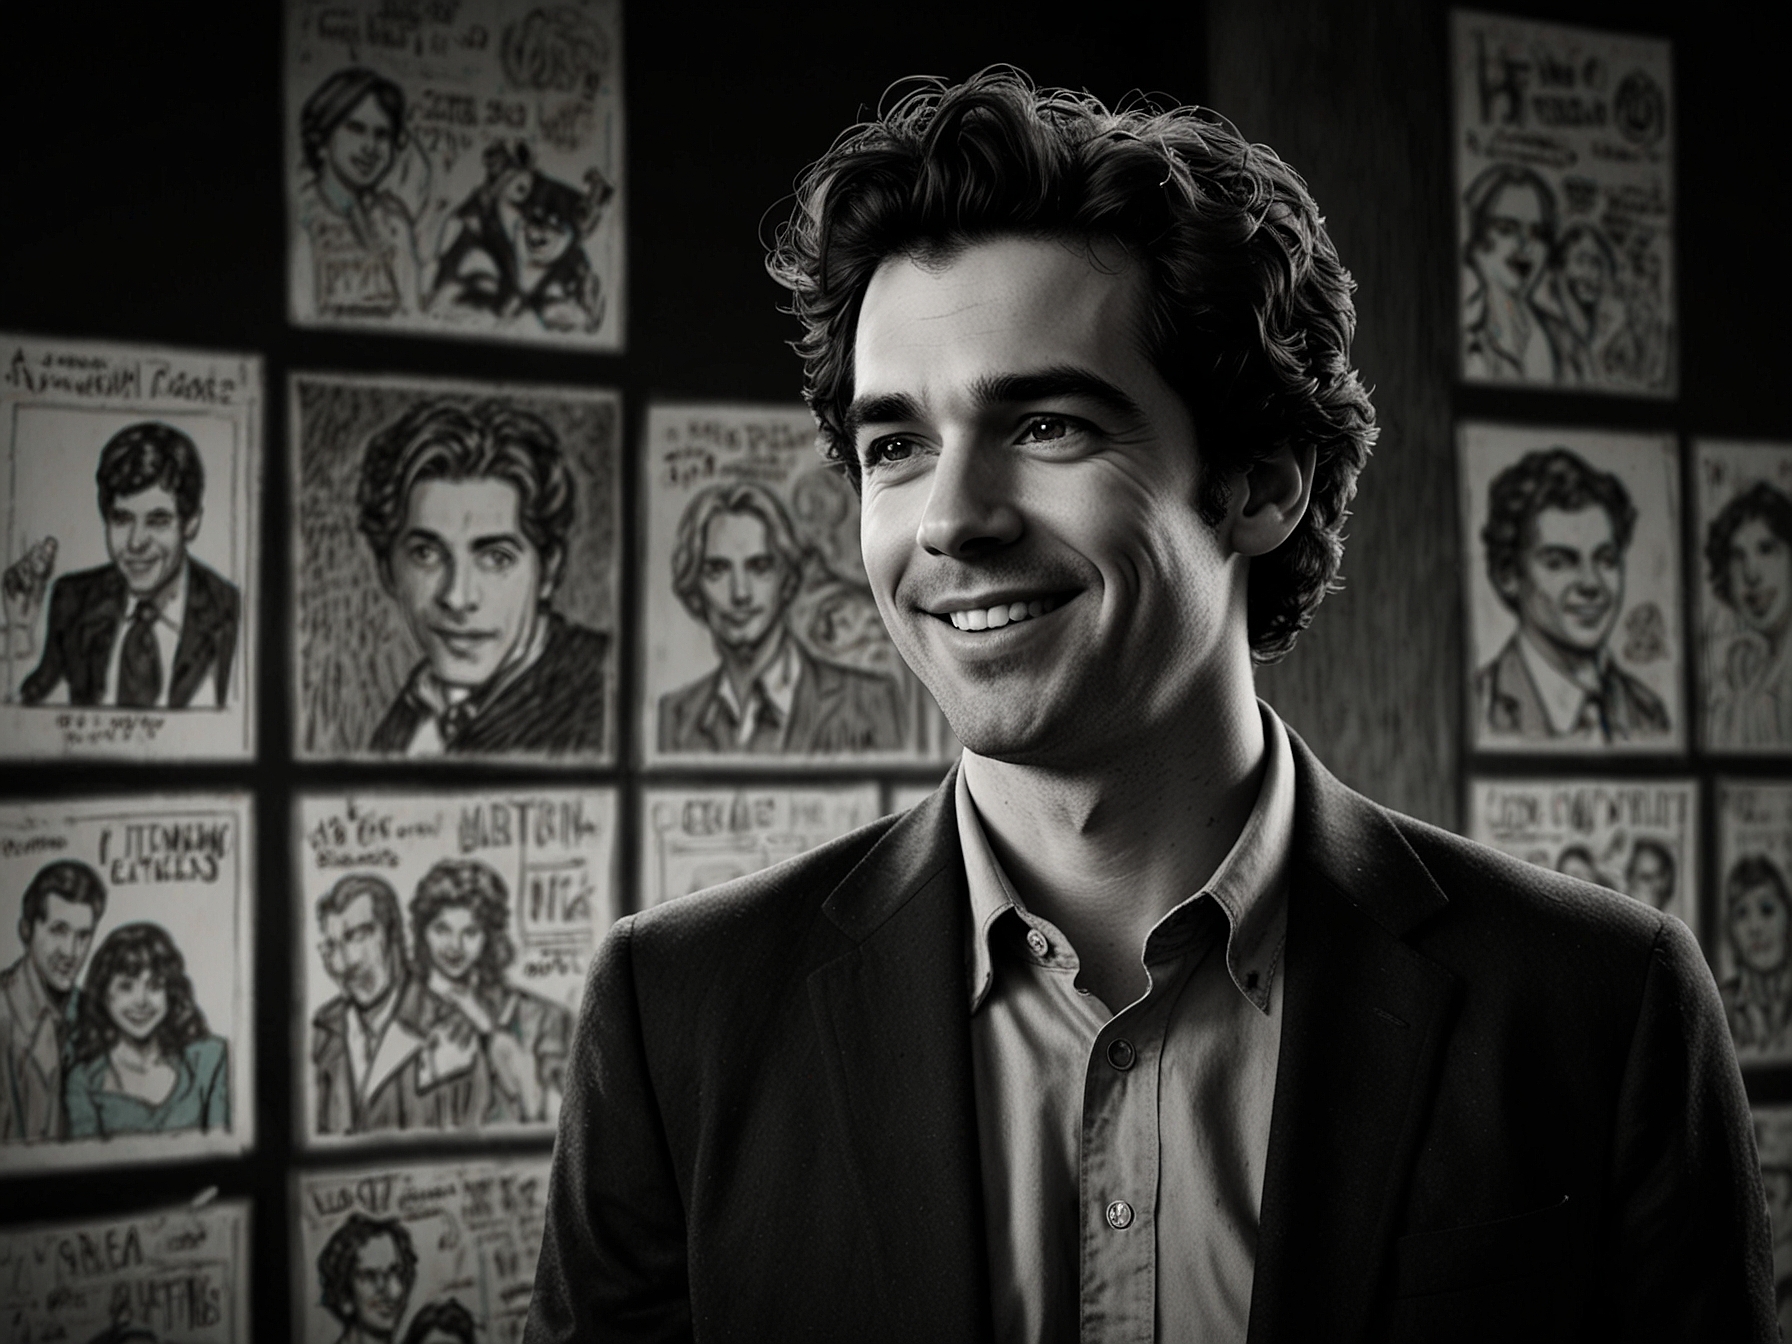 Hamish Linklater, dressed casually and smiling confidently, with a background revealing scenes from Batman: Caped Crusader, symbolizing his exciting new role as the voice of Batman.